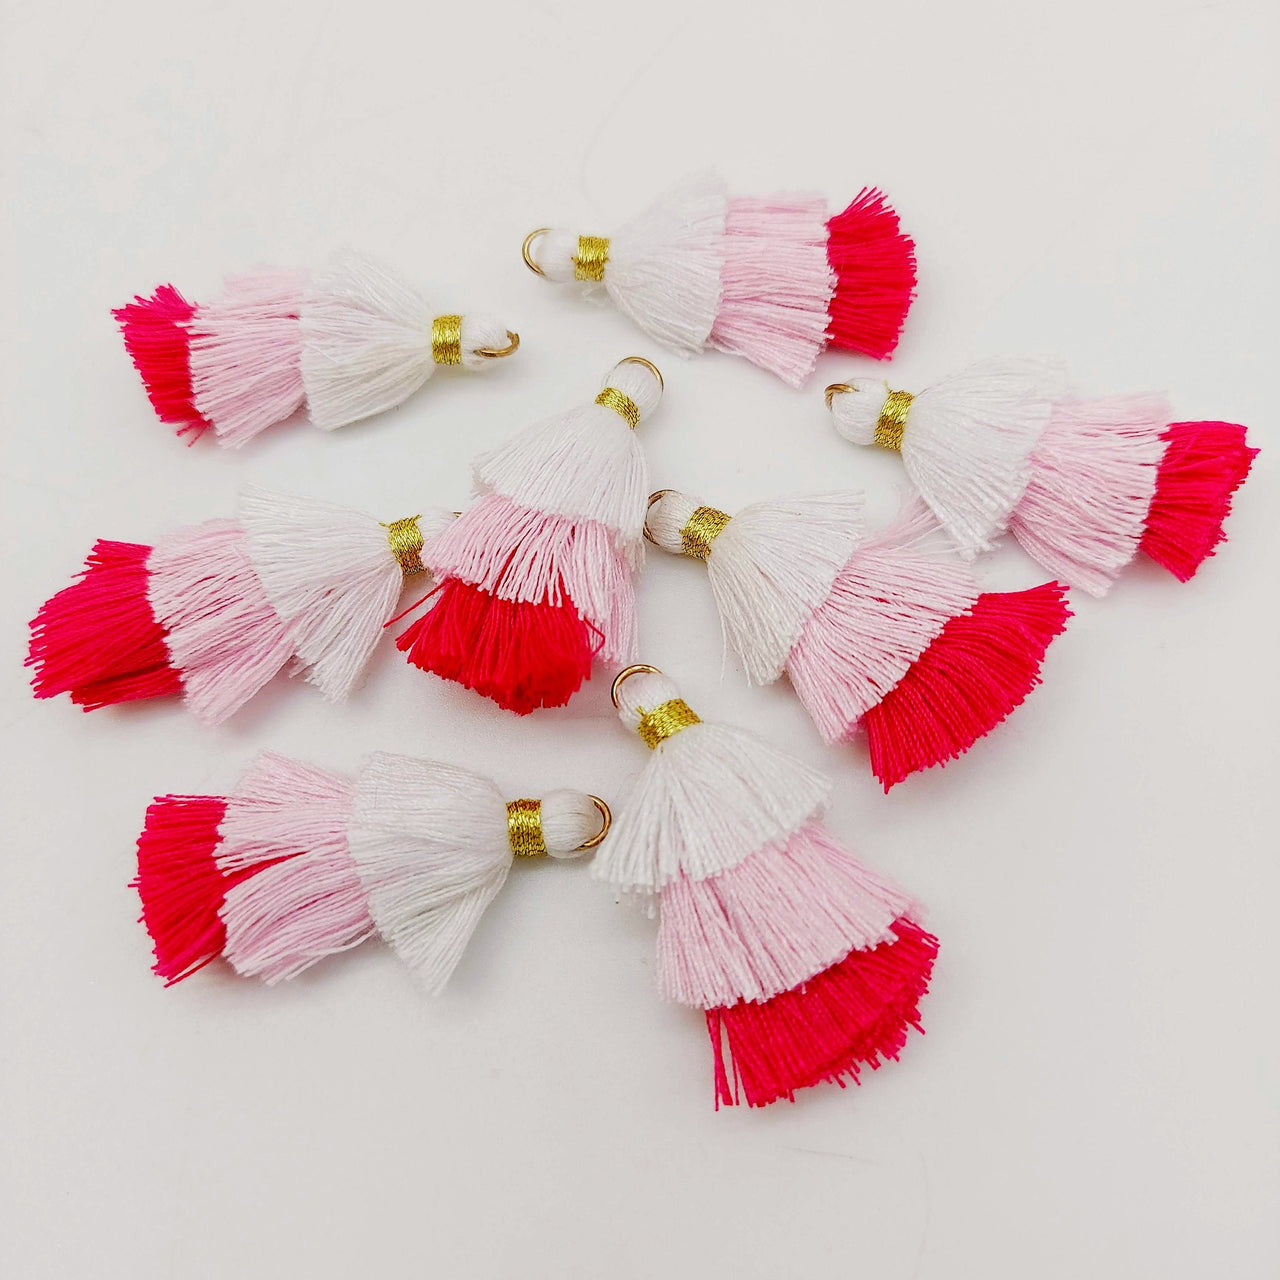 White,Pink and Cerise Pink Small Cotton Tassels in Three Layers With Gold Colour Brass Loop Ring, Tassel Charms x 5